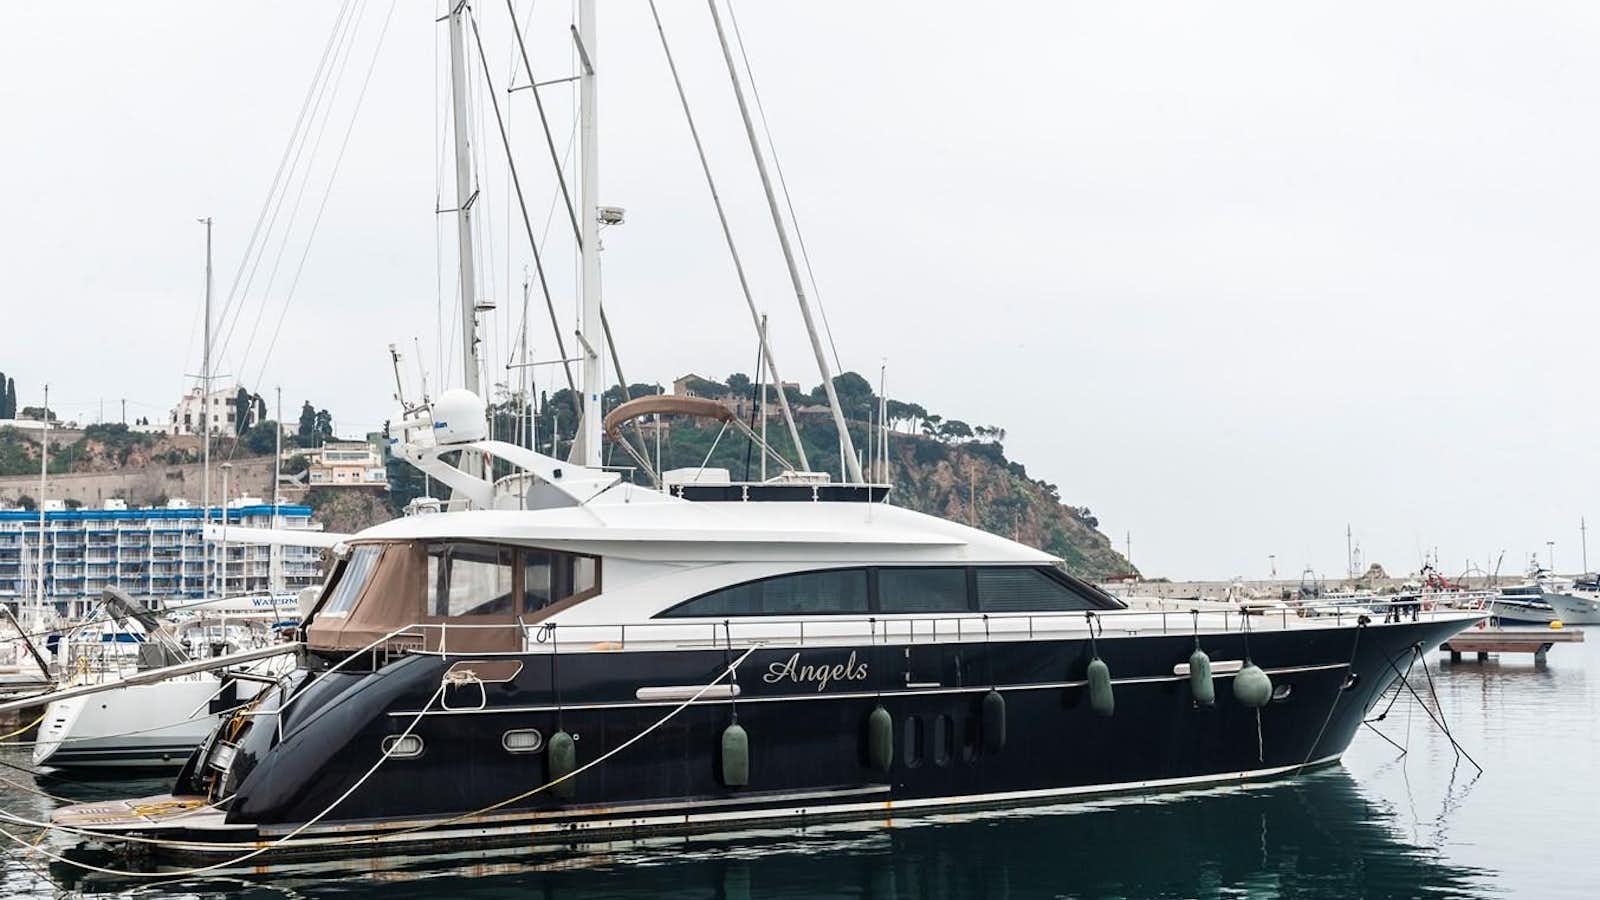 Watch Video for ANGELS Yacht for Sale